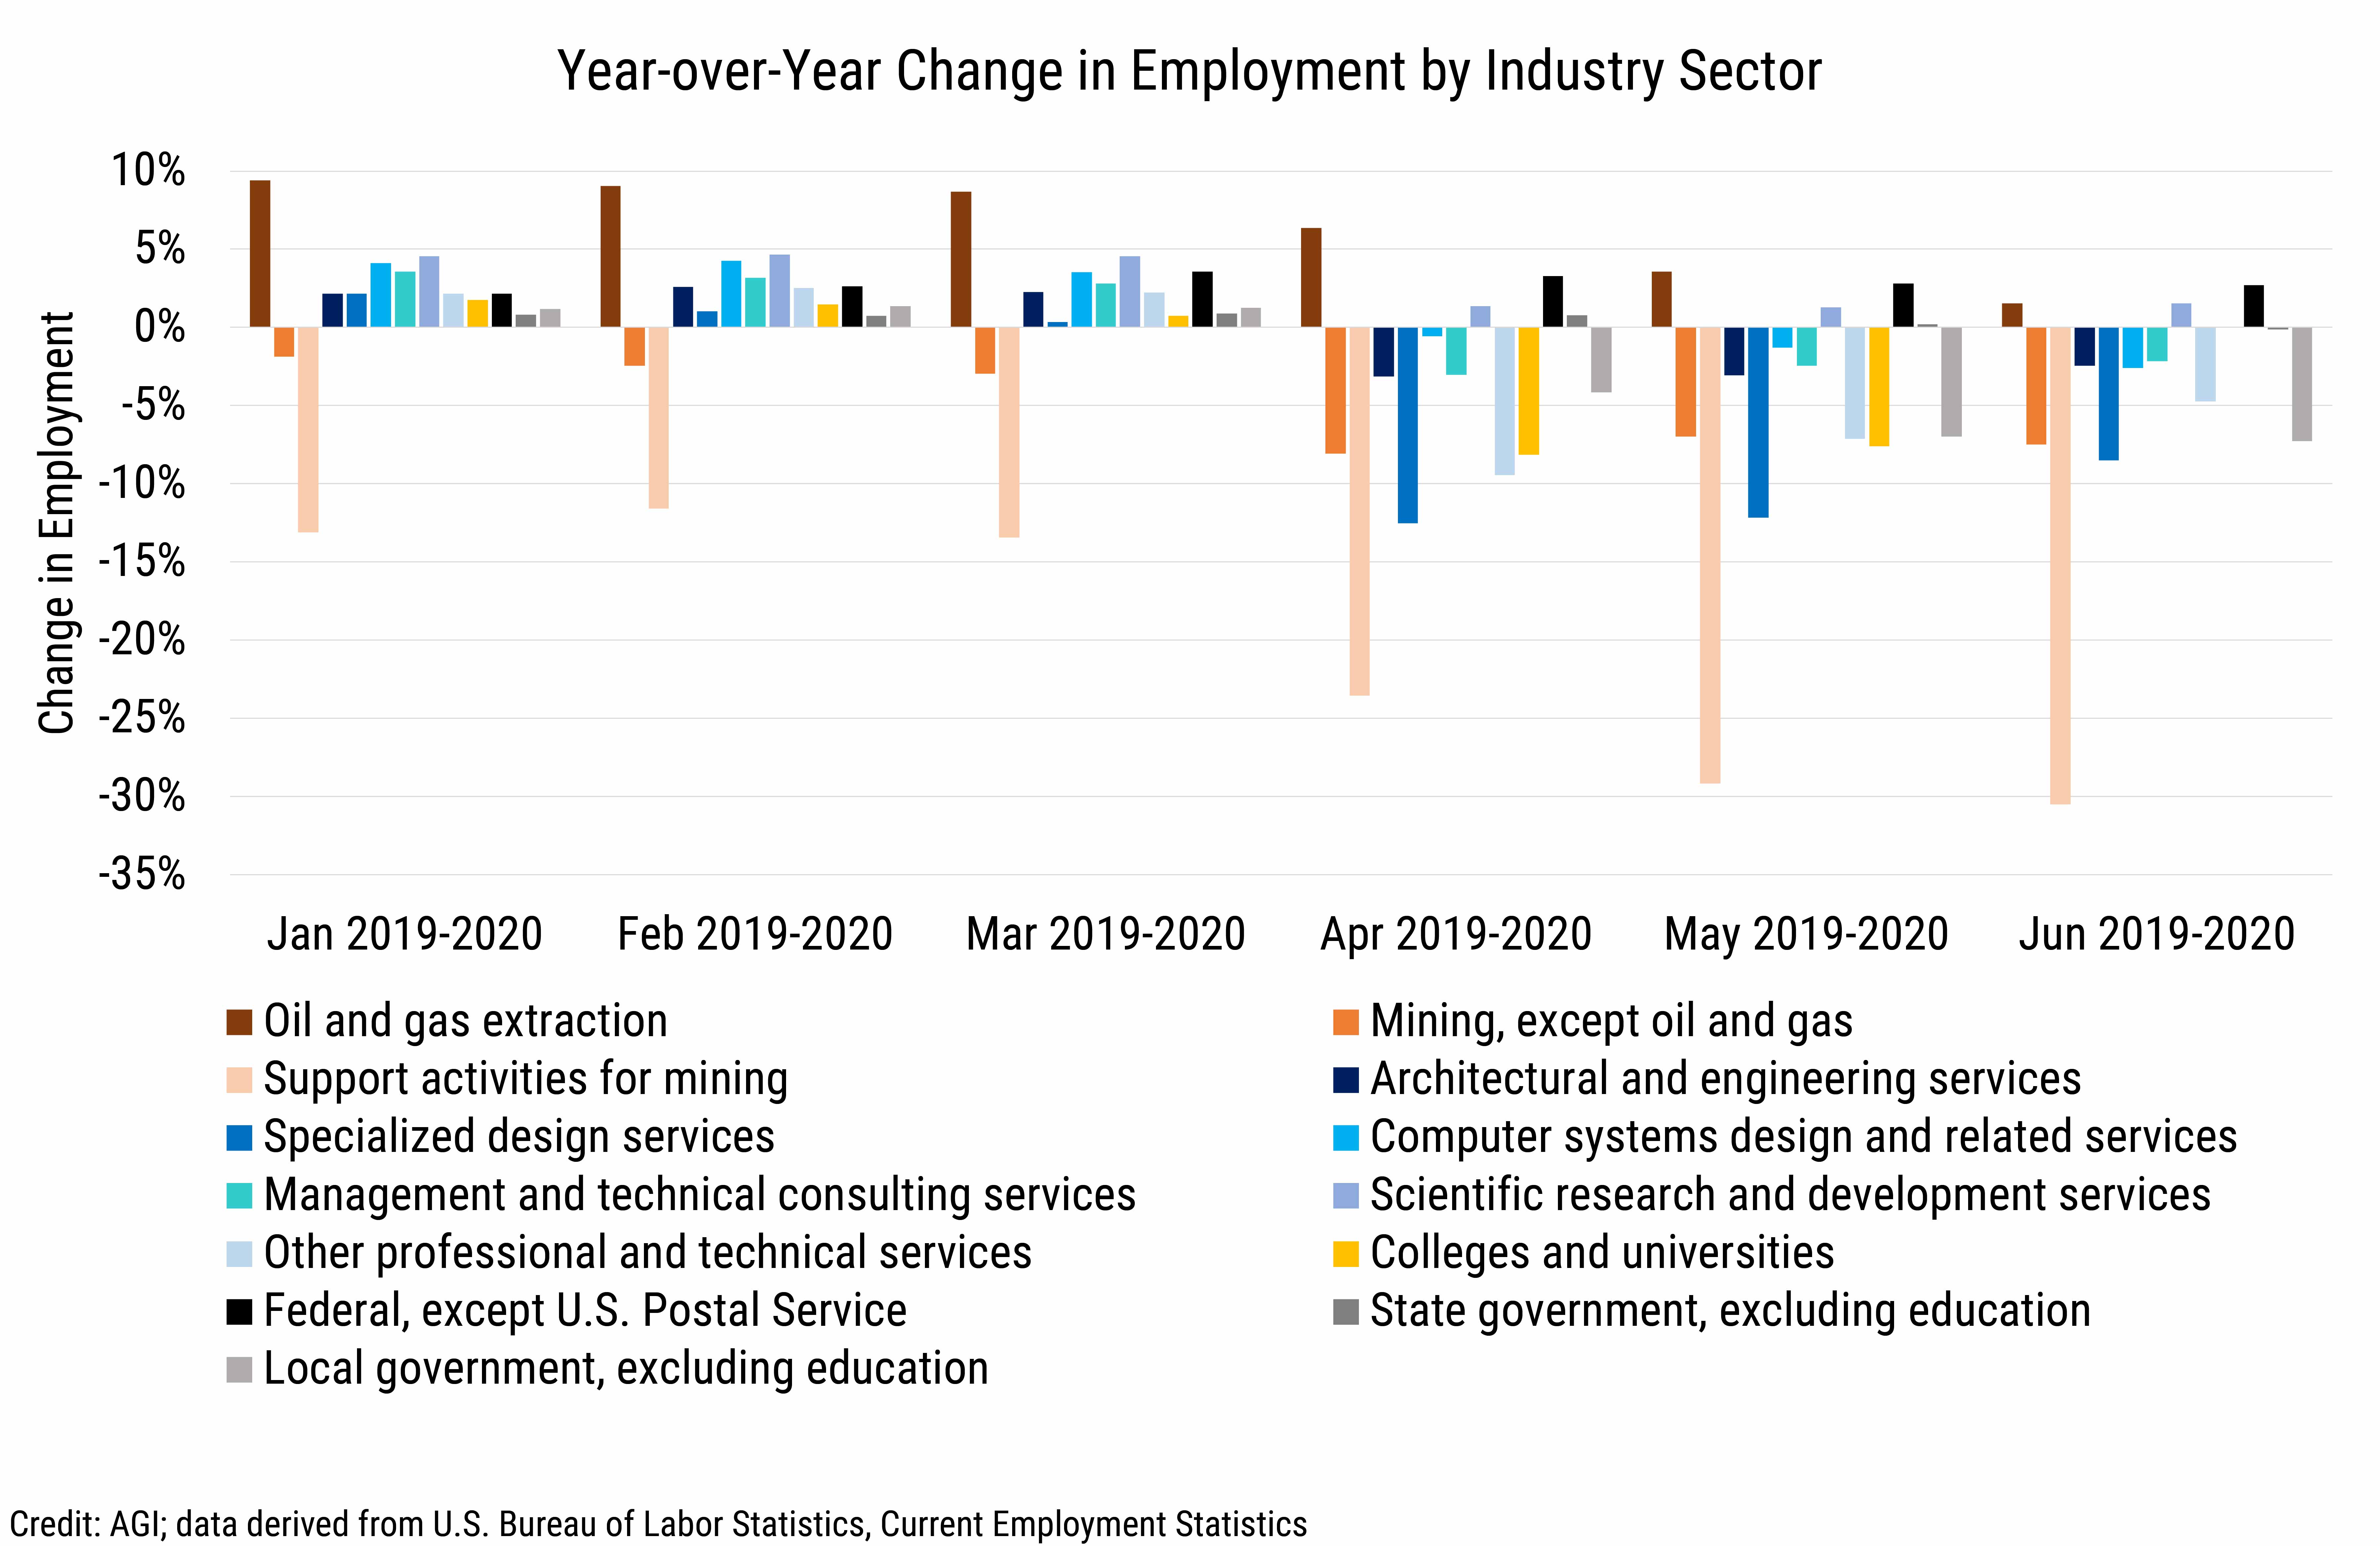 Data Brief 2020-013 chart-04: Year-Over-Year Change in Employment by Industry Sector (Credit: AGI, data derived from U.S. Bureau of Labor Statistics, Current Employment Statistics)